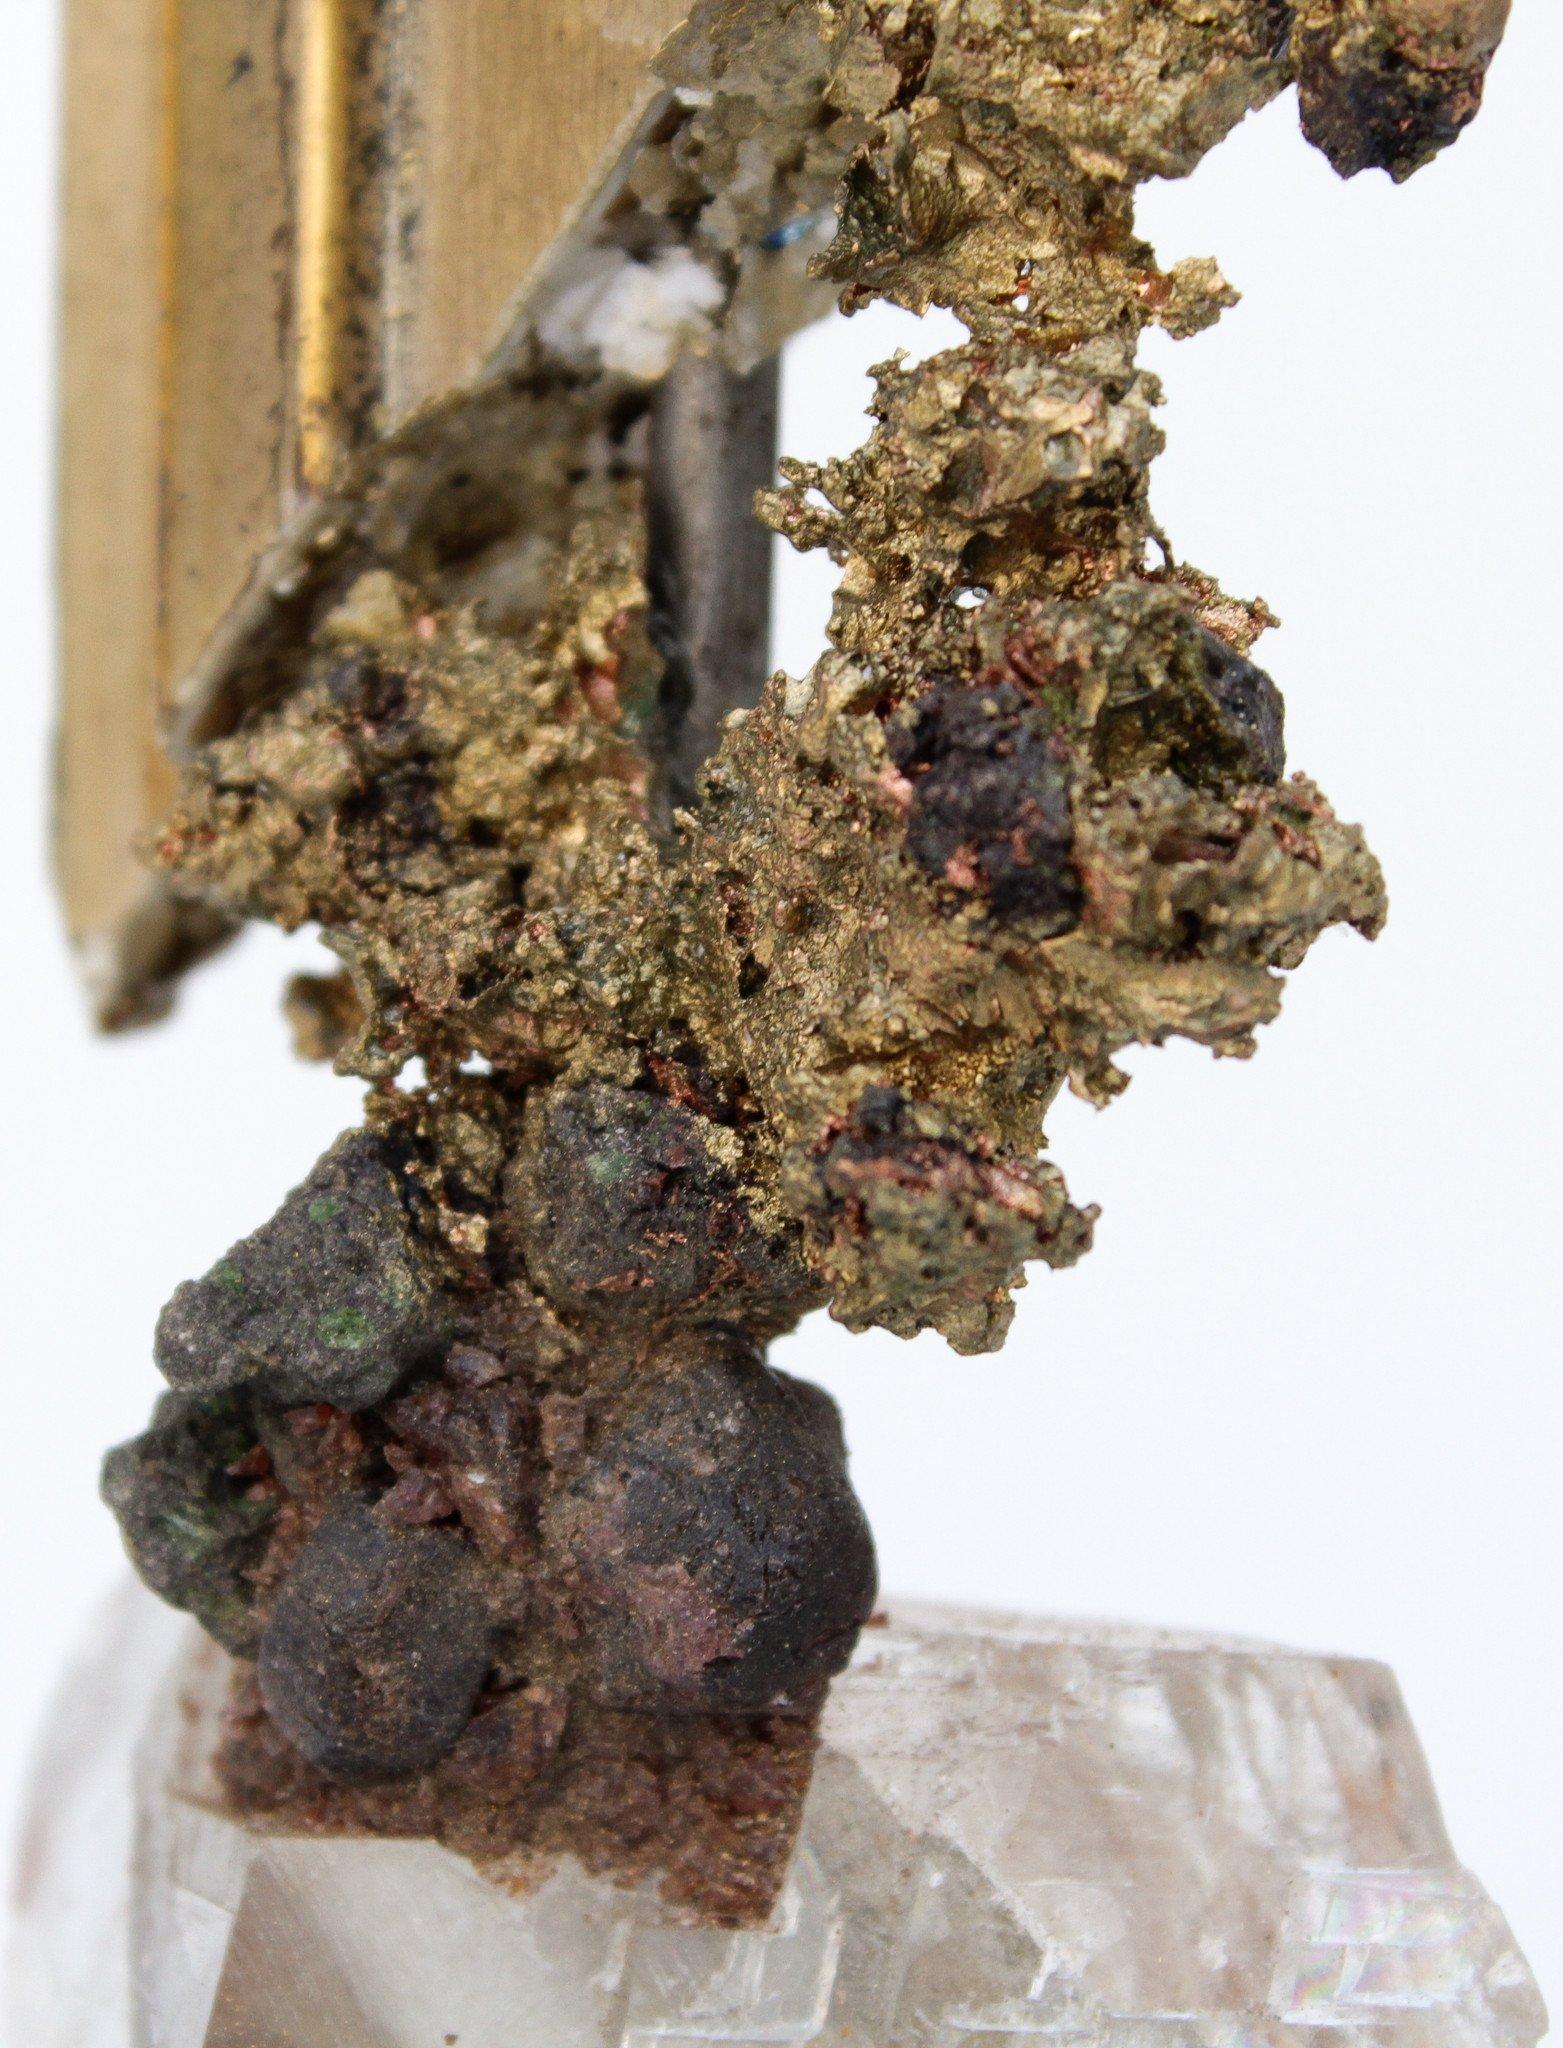 Rococo 18th Century Italian Fragment with Copper, Garnets, and Gold Mica on Calcite For Sale